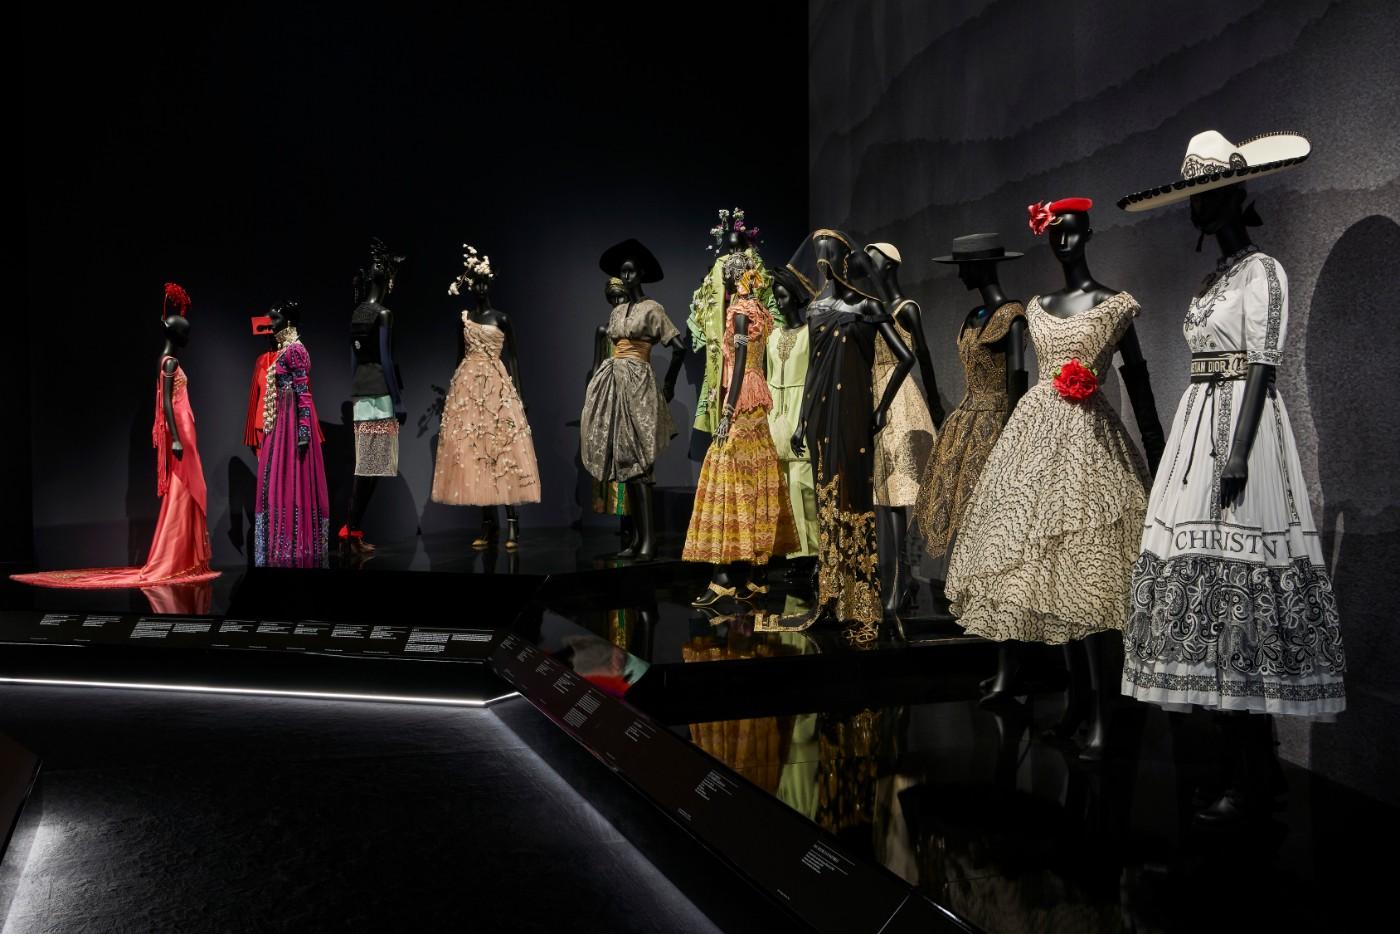 The V&A's Christian Dior Designer of Dreams exhibition, Travels section